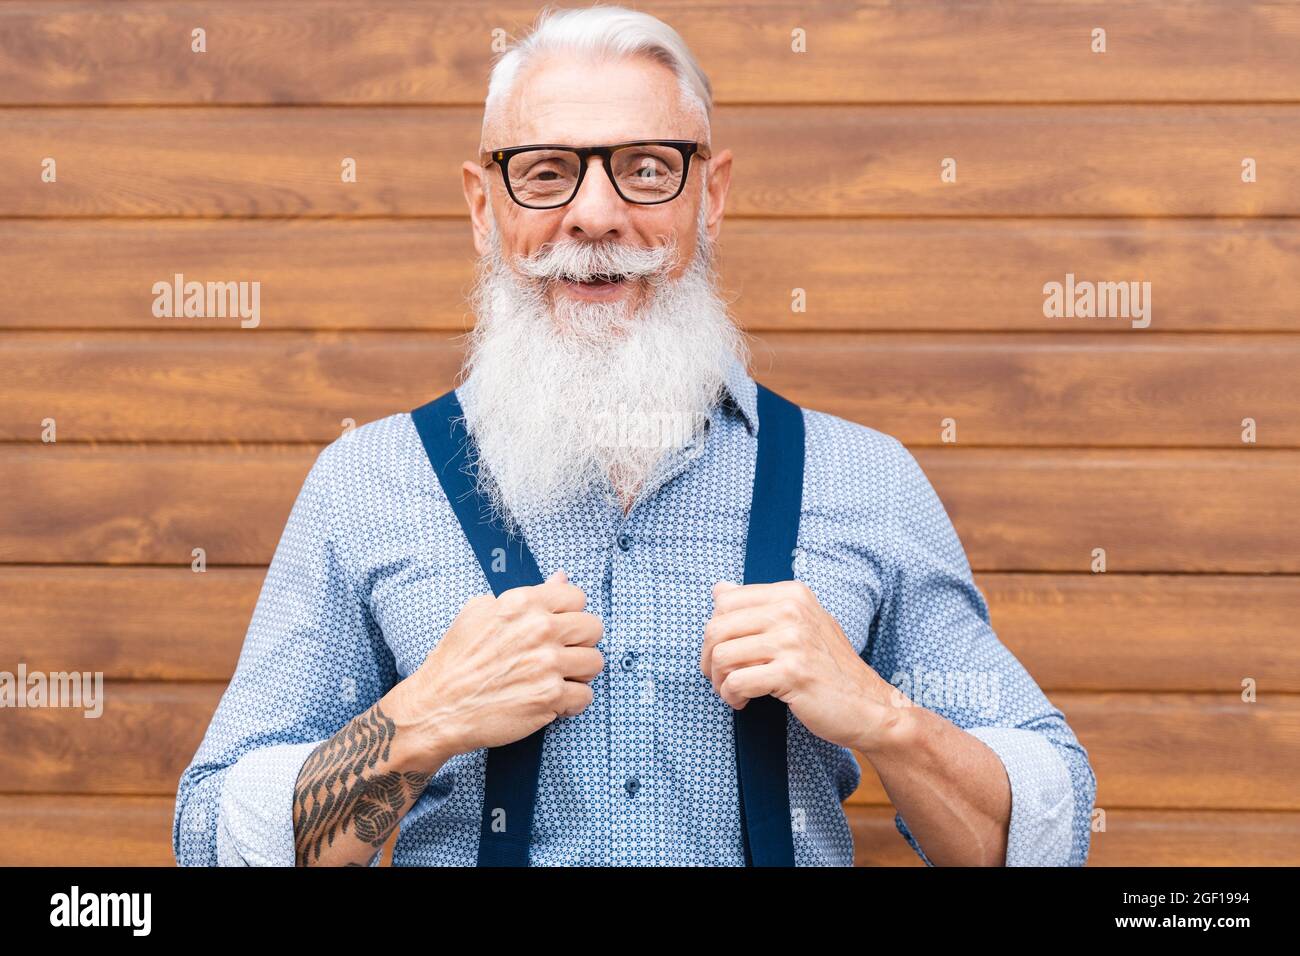 Happy hipster senior man smiling on camera with wood wall in background outdoor in the city- Focus on face Stock Photo